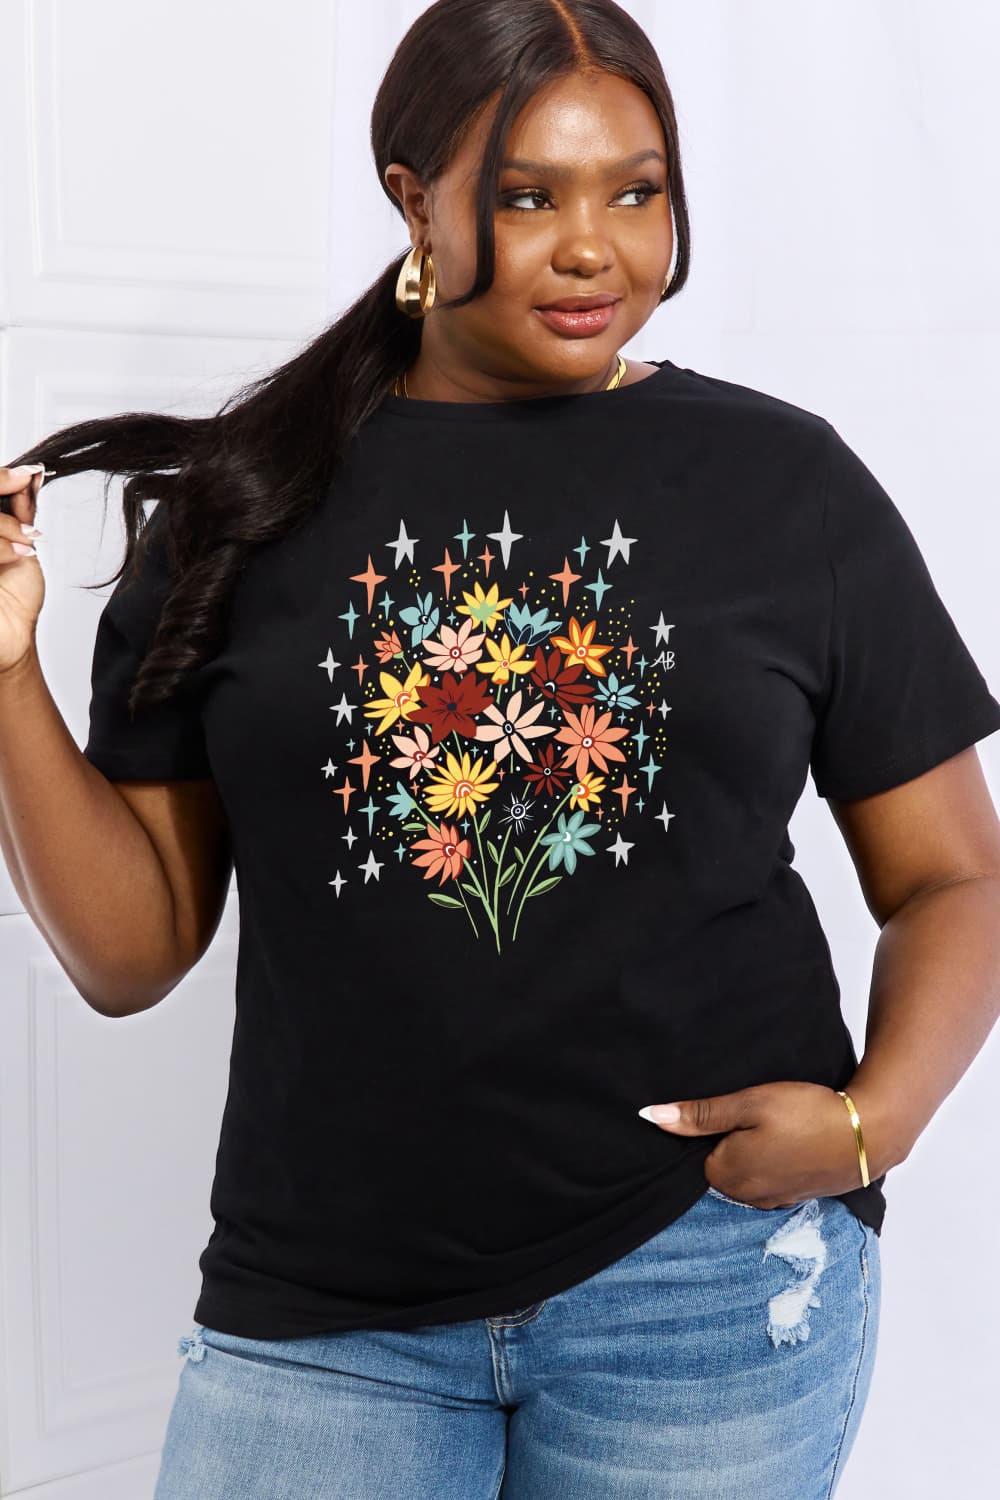 Simply Love - Floral Graphic Tee